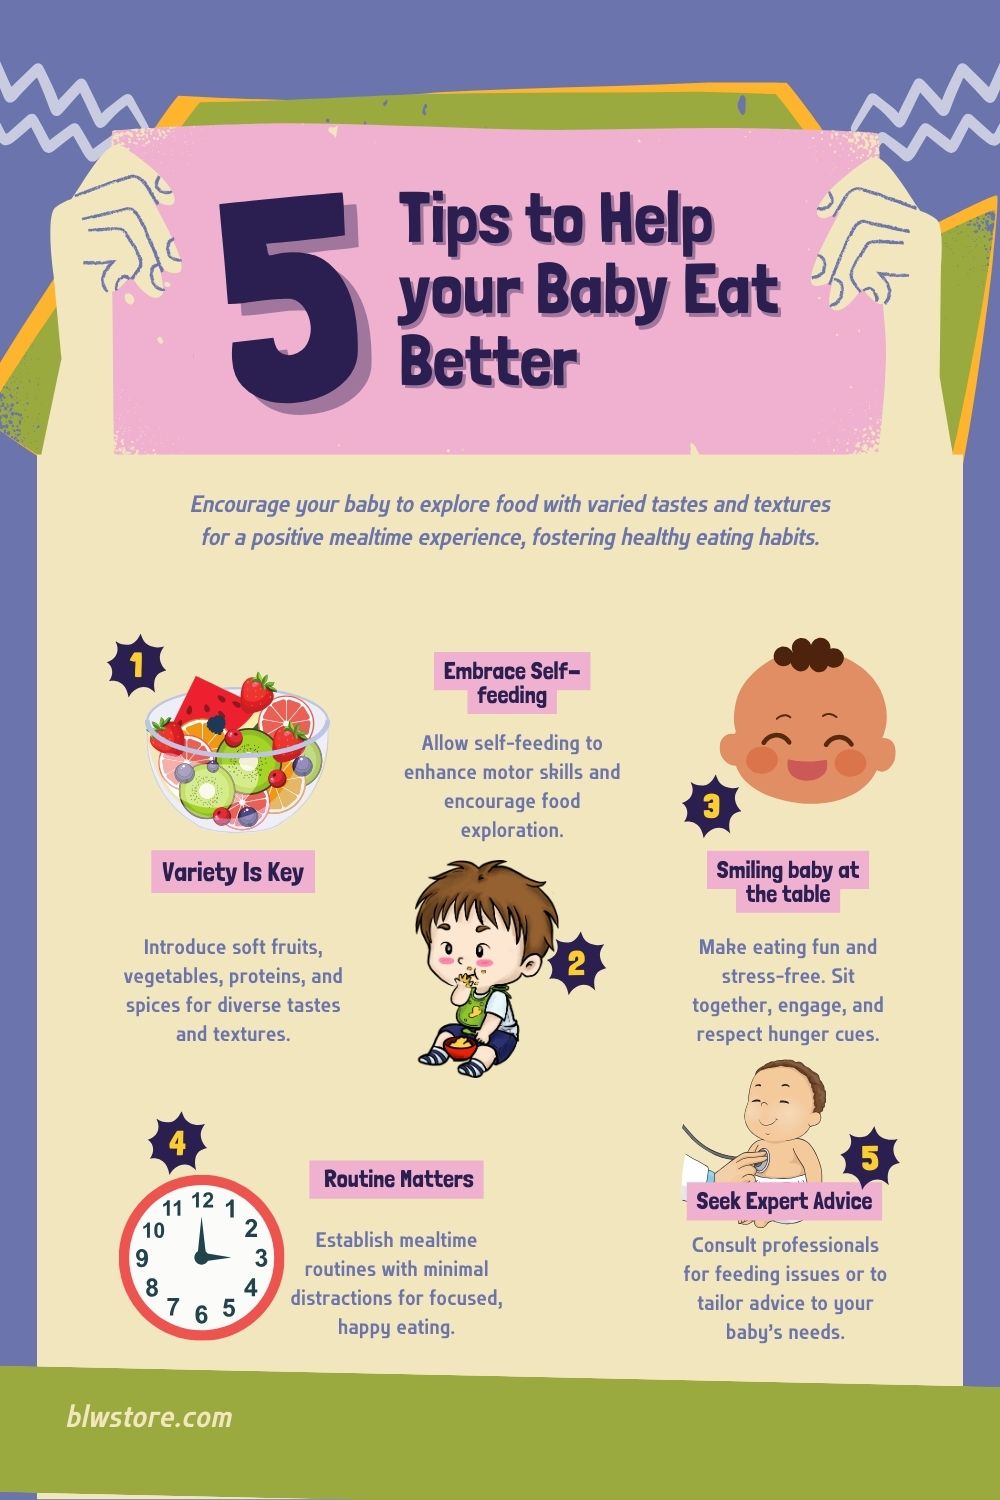 Tips to help your baby eat